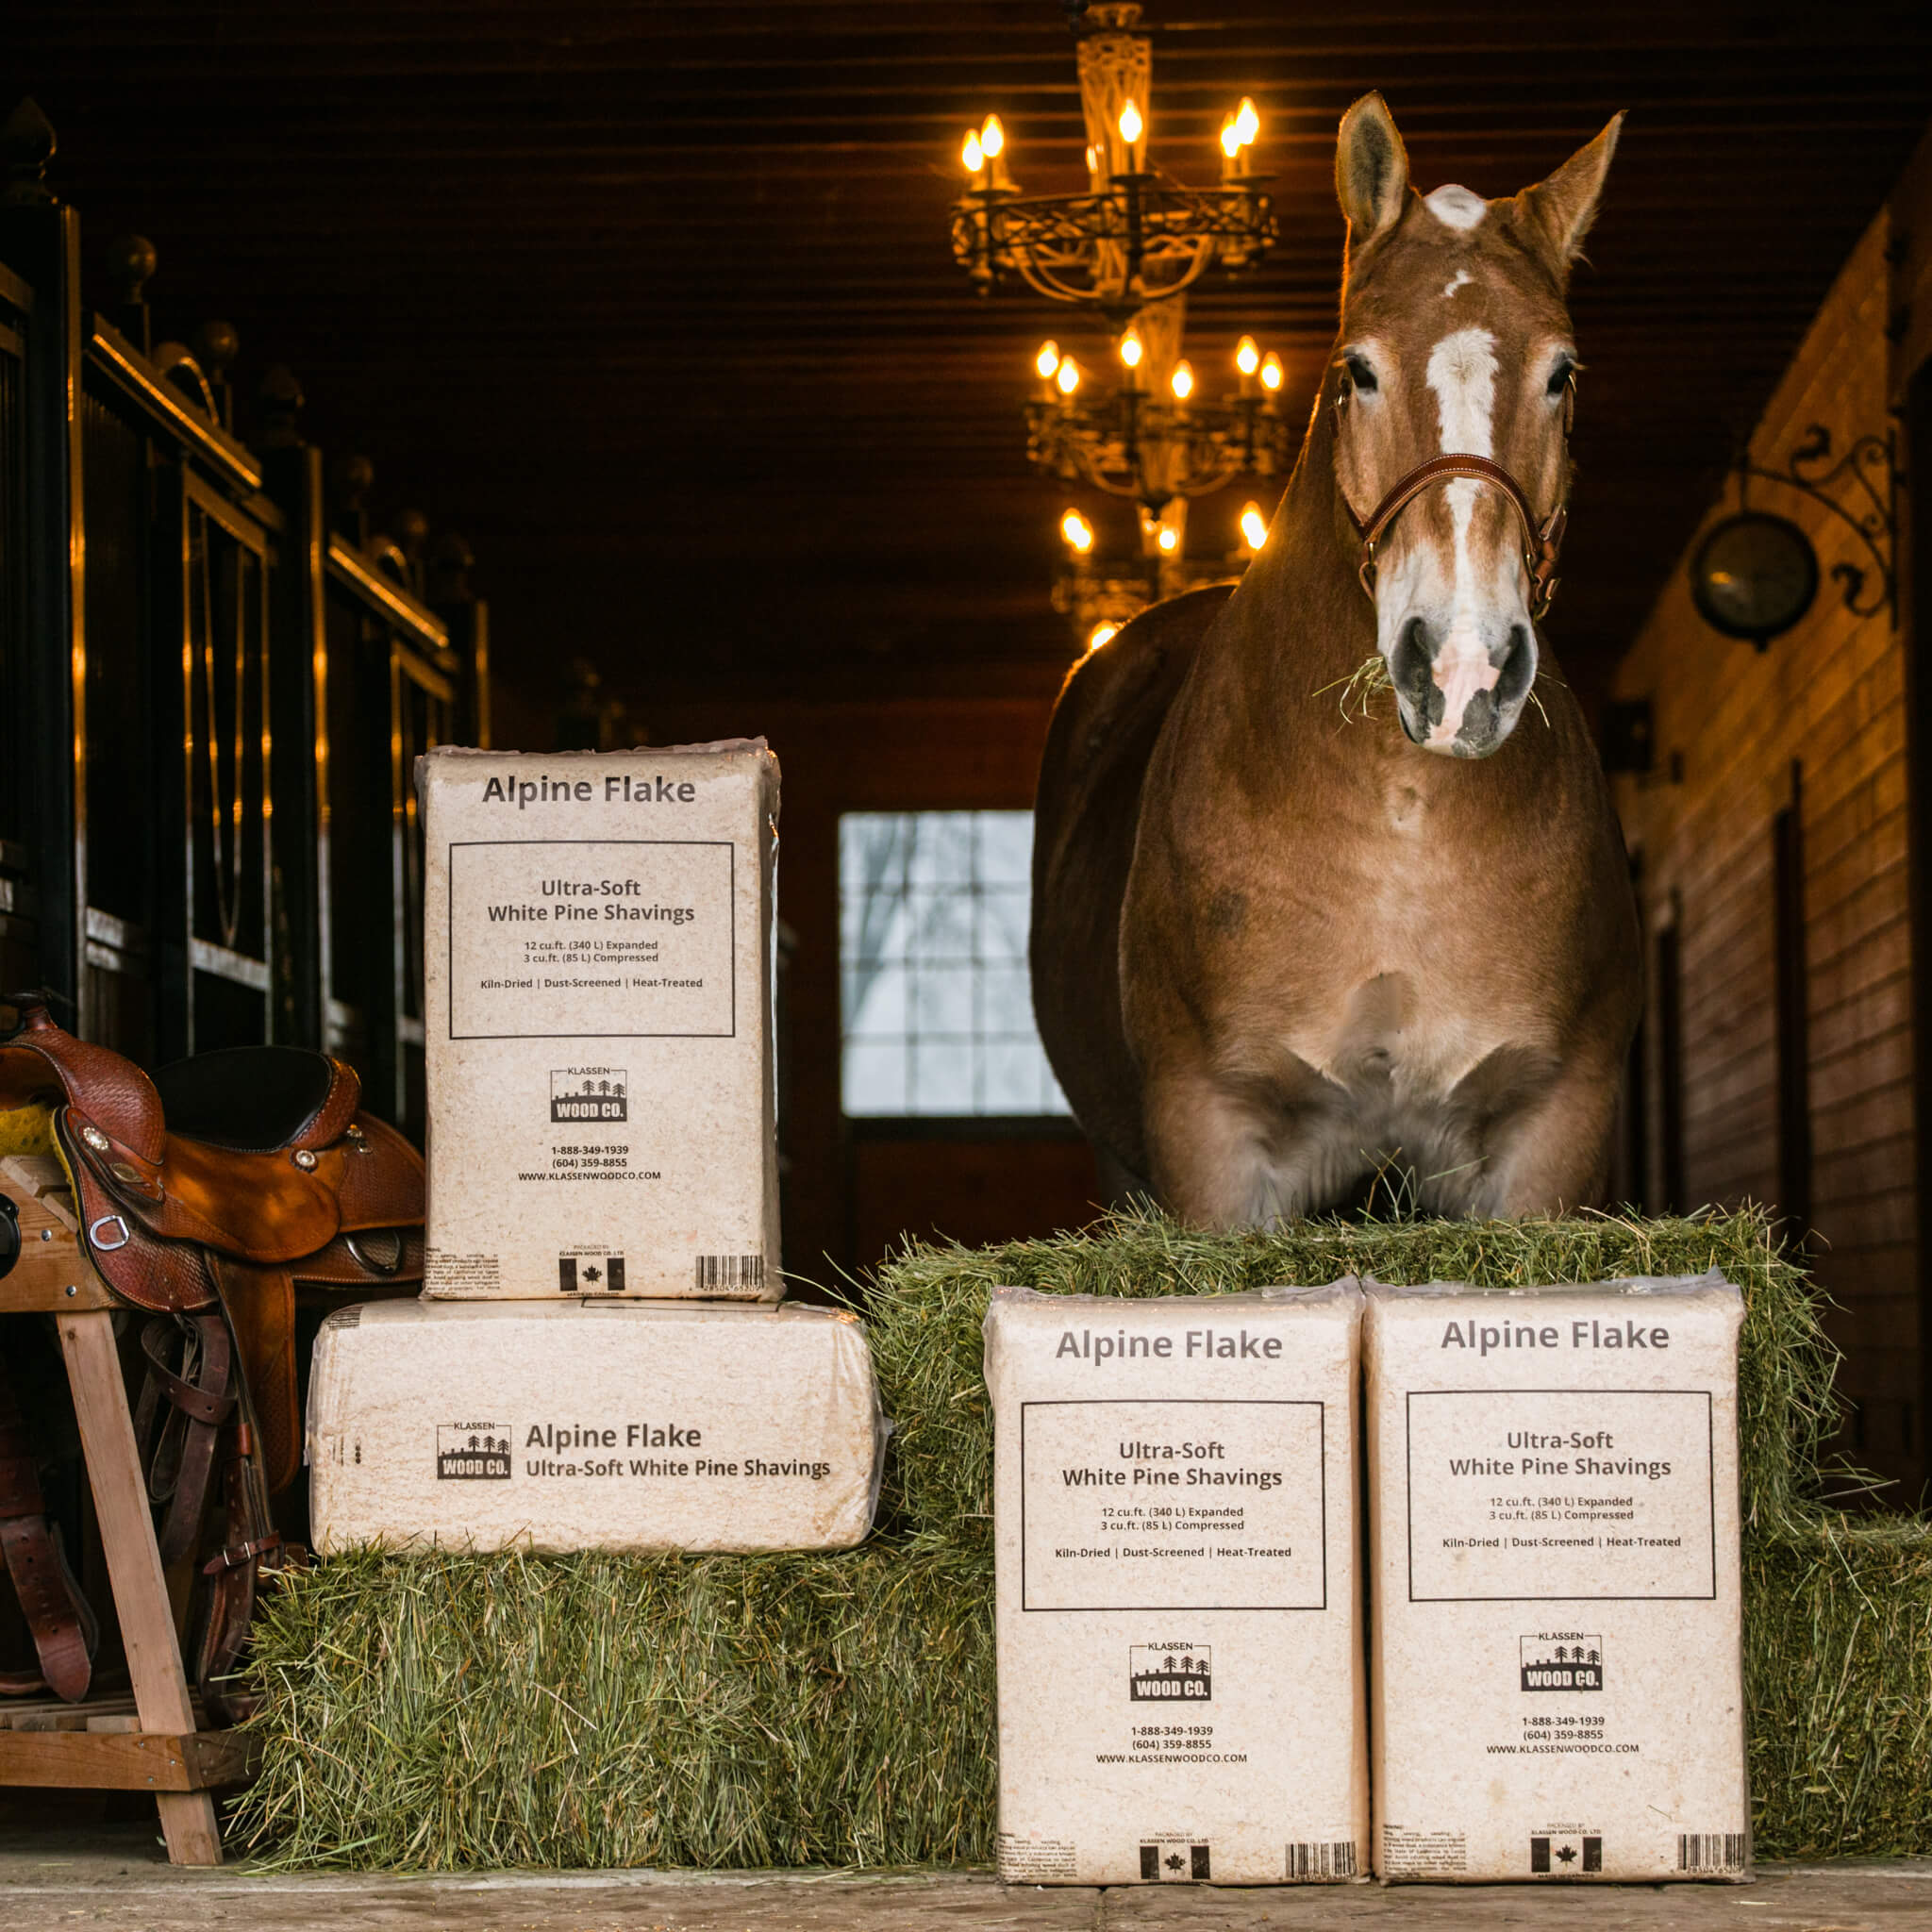 horse - Photographed for Klassen Wood Co Wood Chips for farm animals - Photography by Vancouver Photographer Rob Trendiak